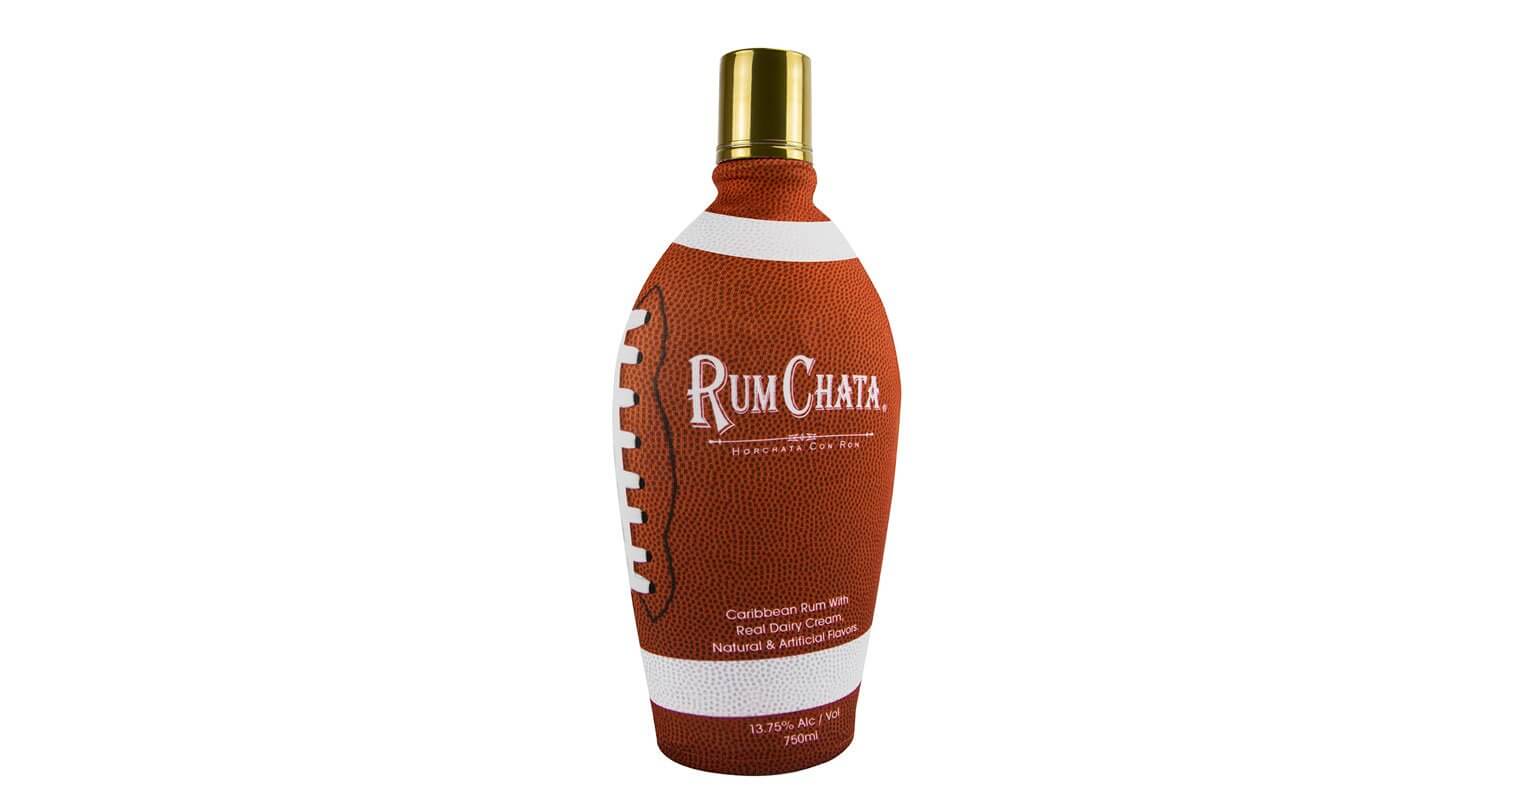 RumChata Football Sleeve, with bottle on white, featured image